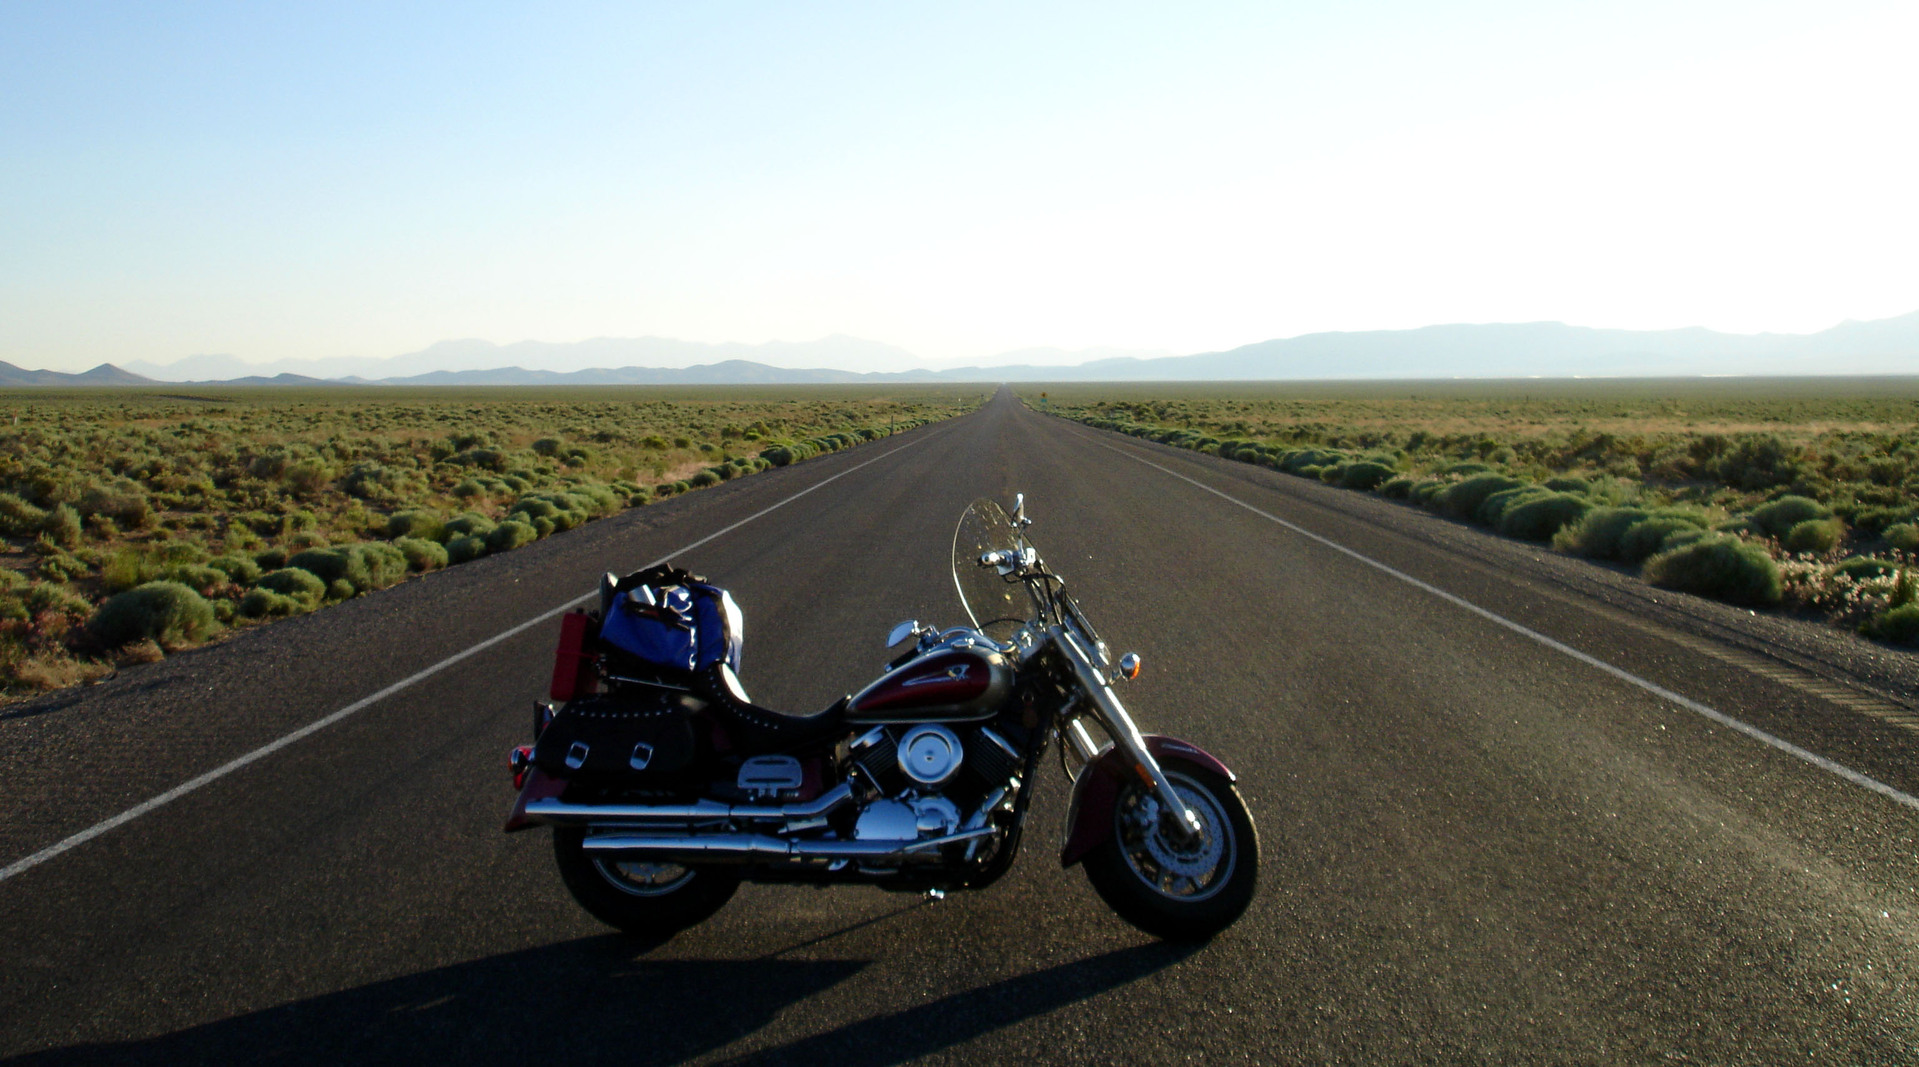 Texas fatal motorcycle accidents